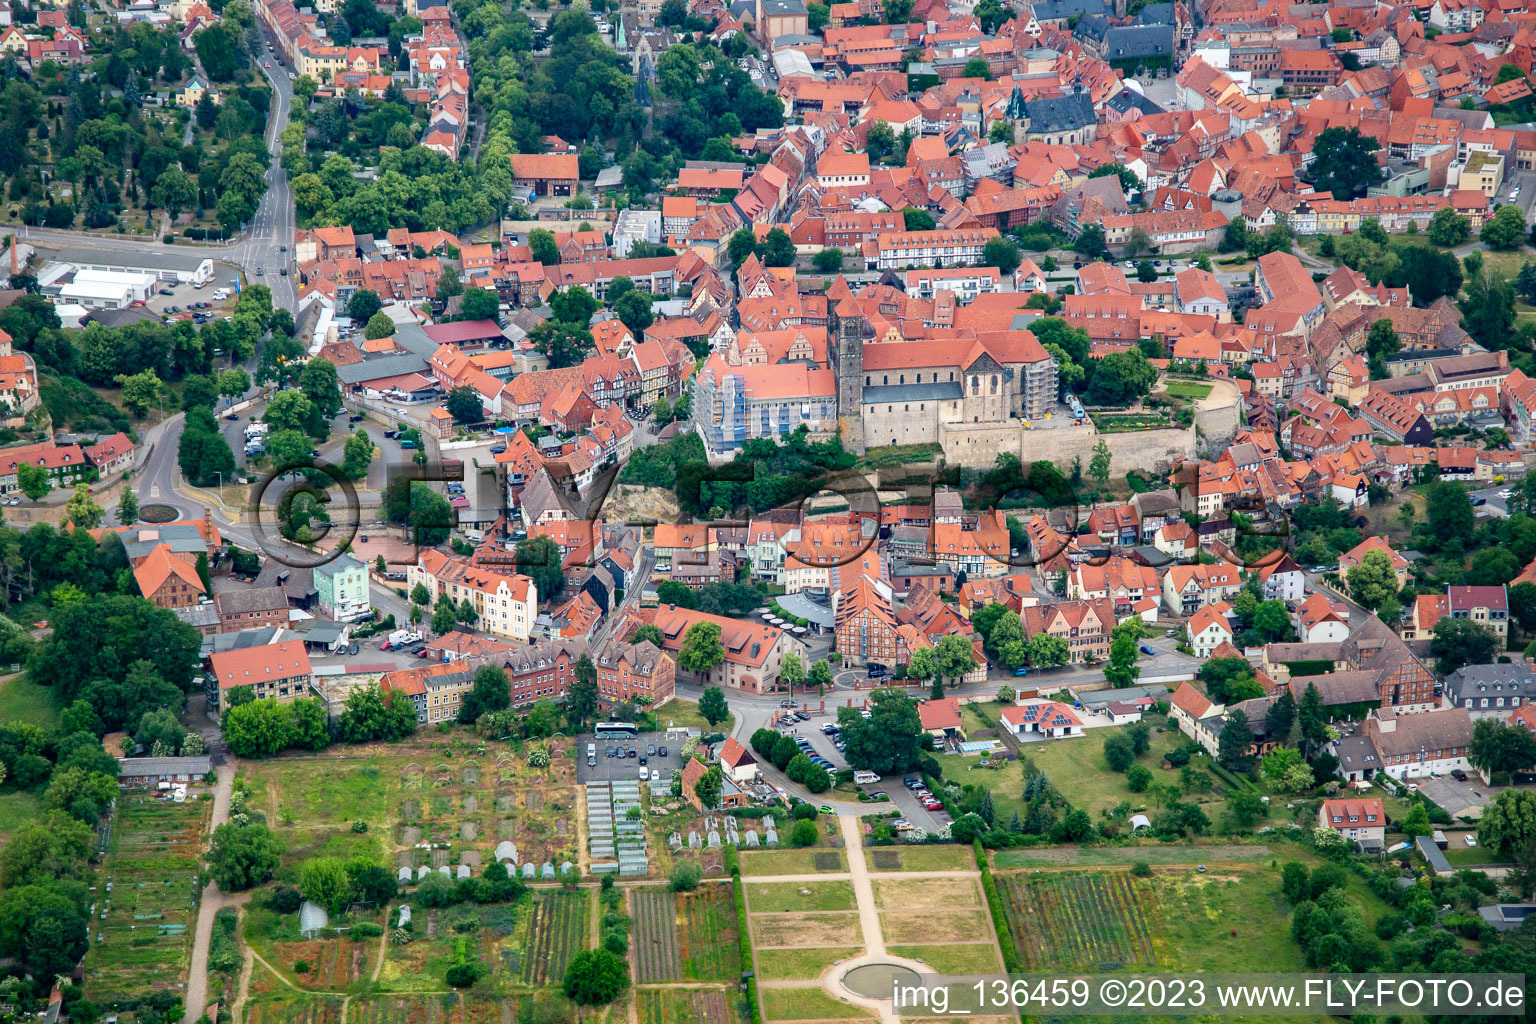 Aerial view of Collegiate Church of St. Servatii in Quedlinburg in the state Saxony-Anhalt, Germany